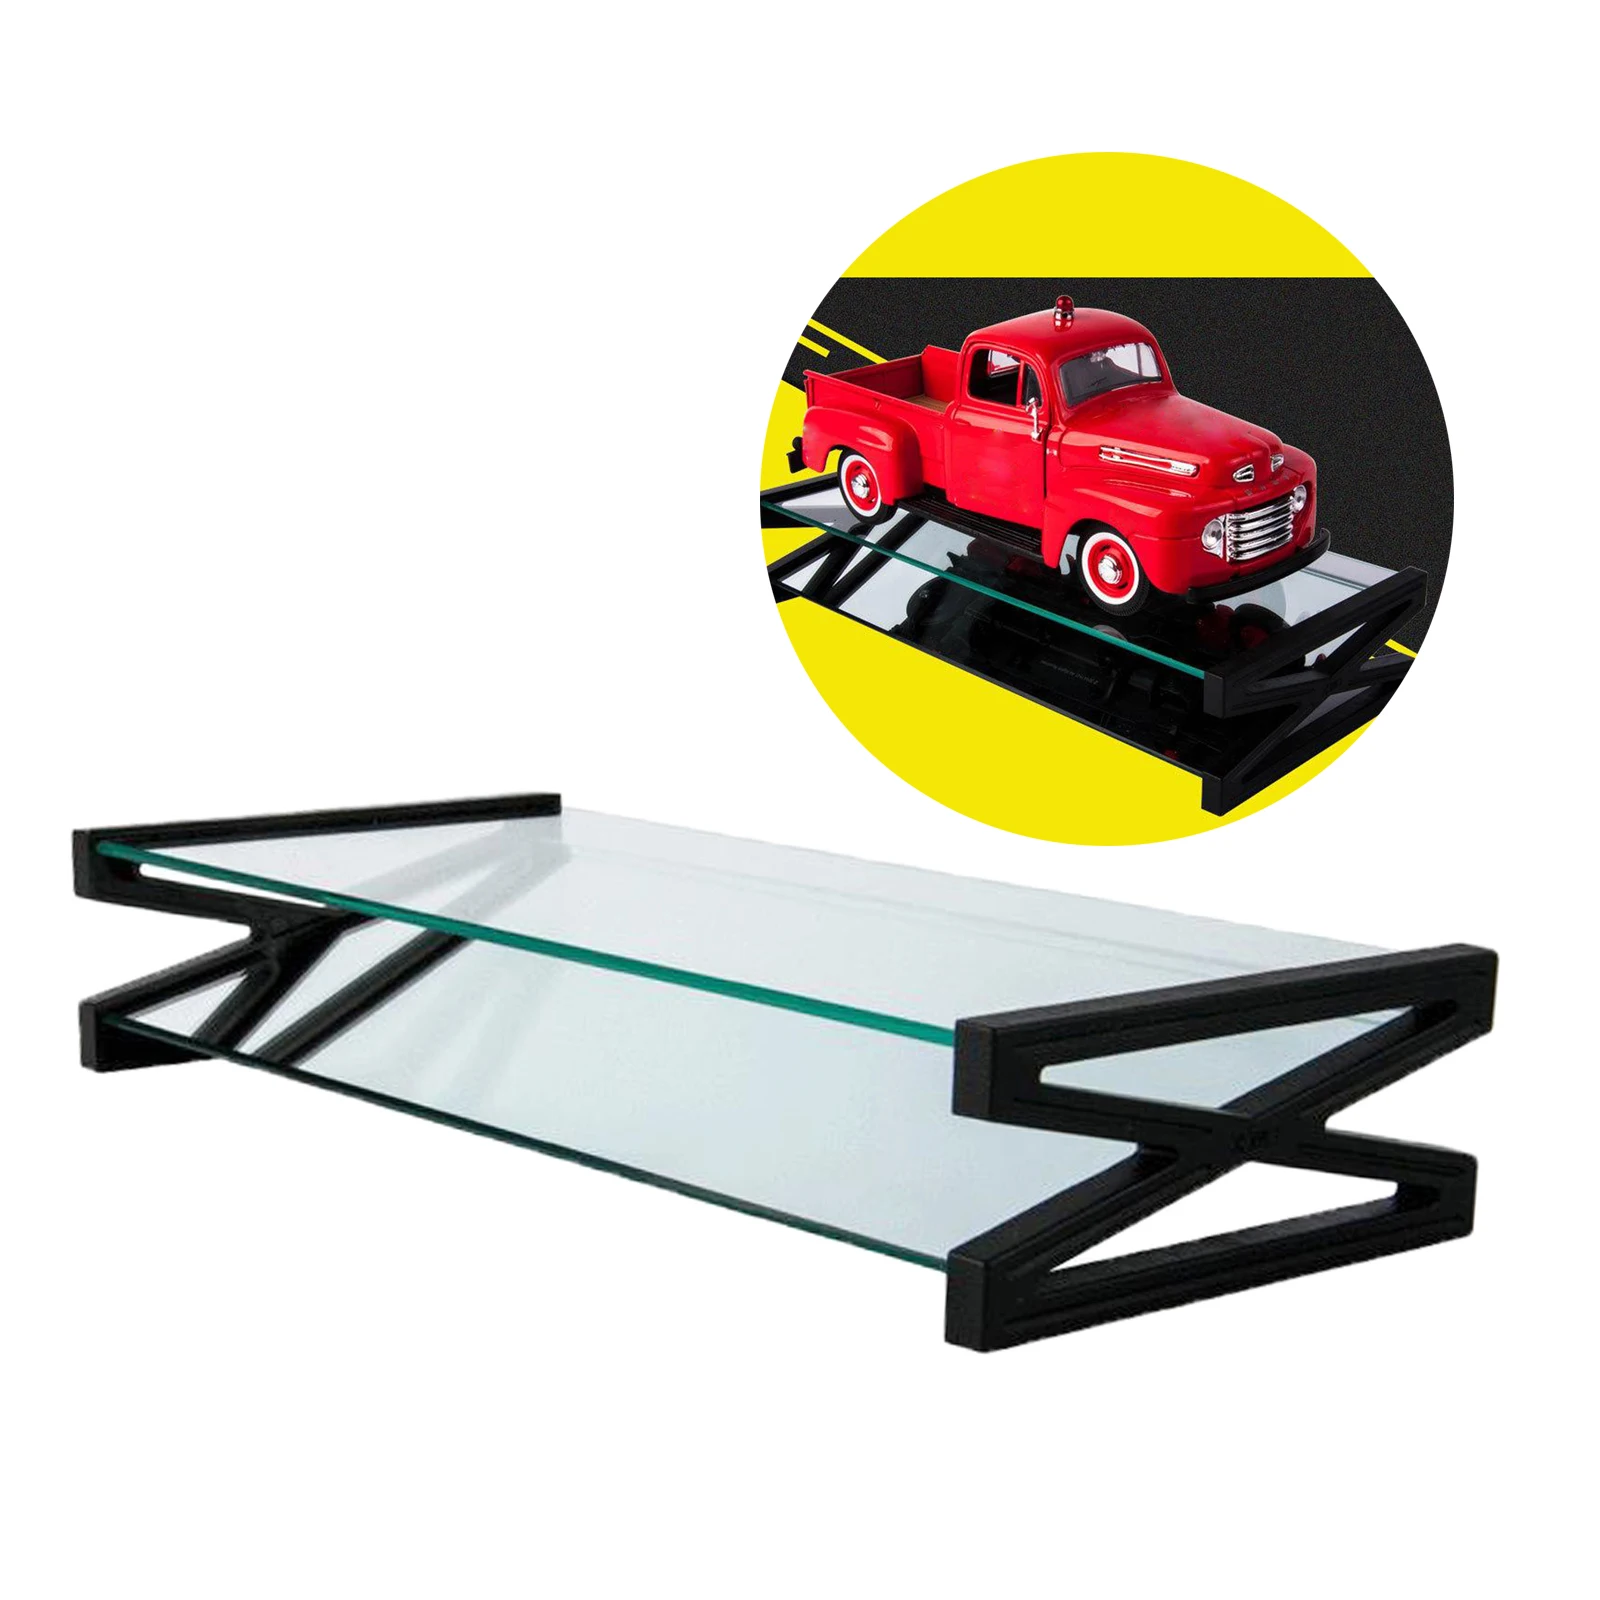 1:18 Scale Display Stand Holder Countertop Case for Model Car Action Figures